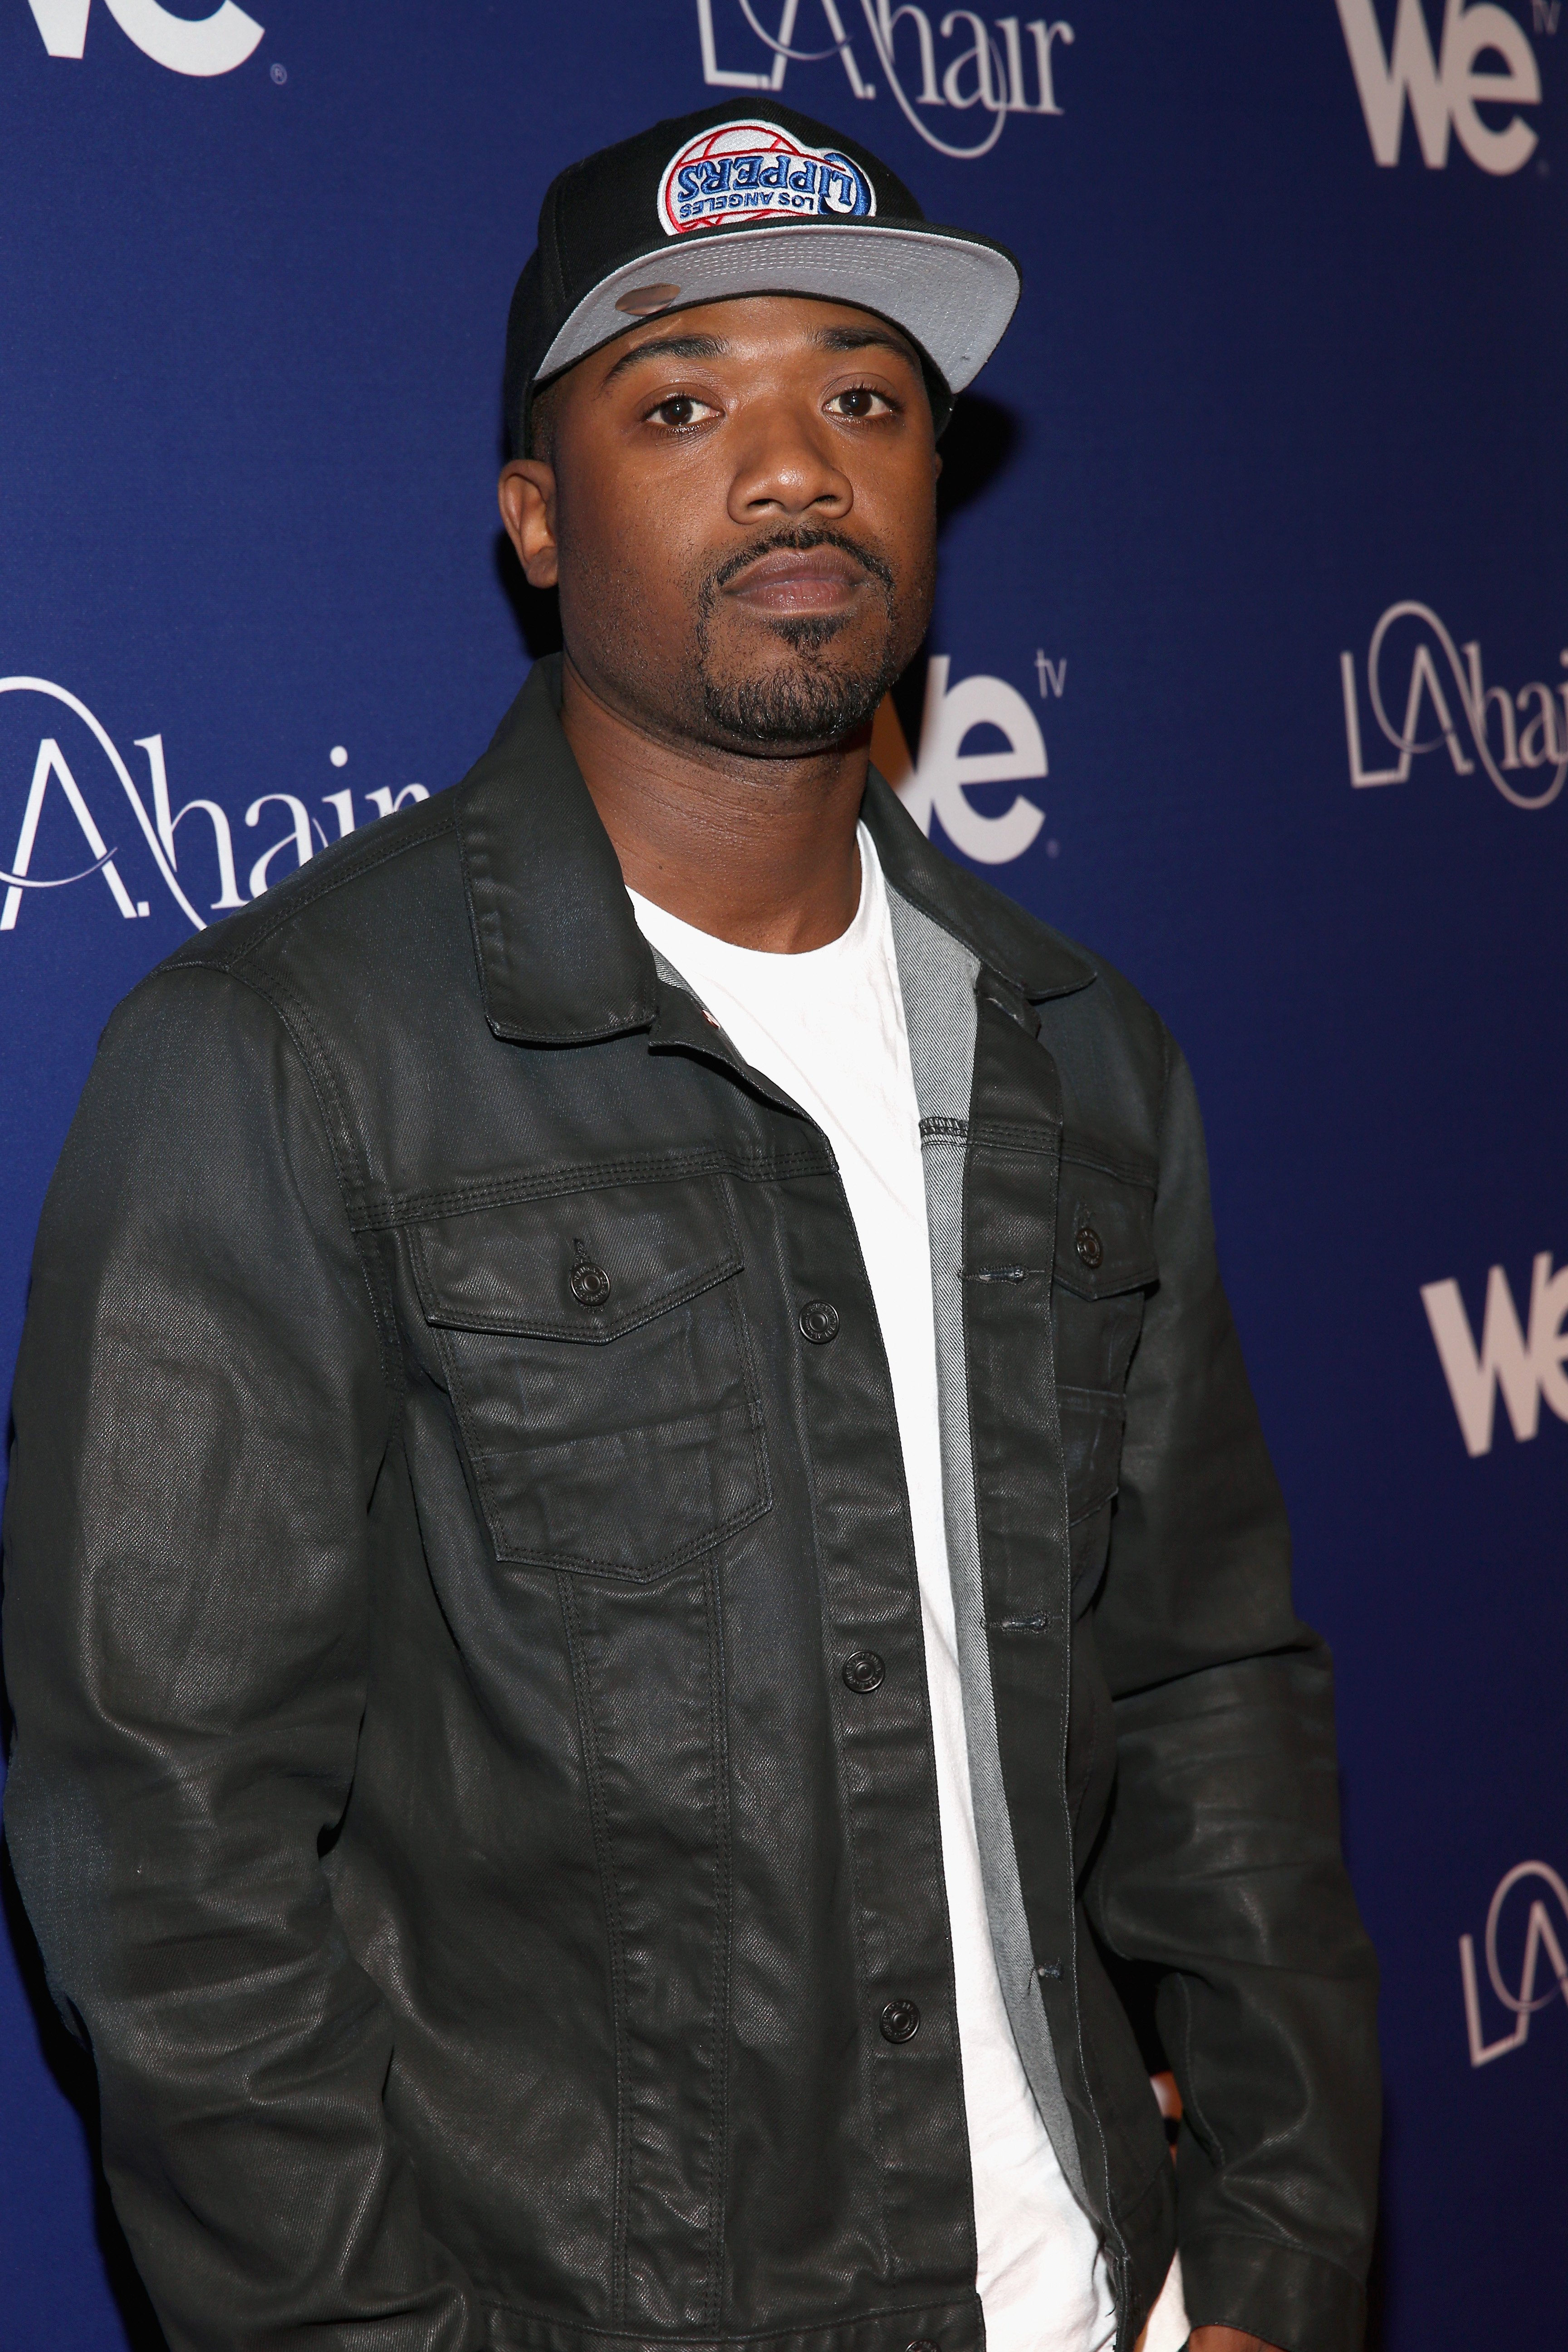 Ray J at a premiere for We tv in March 2014. | Photo: Getty Images